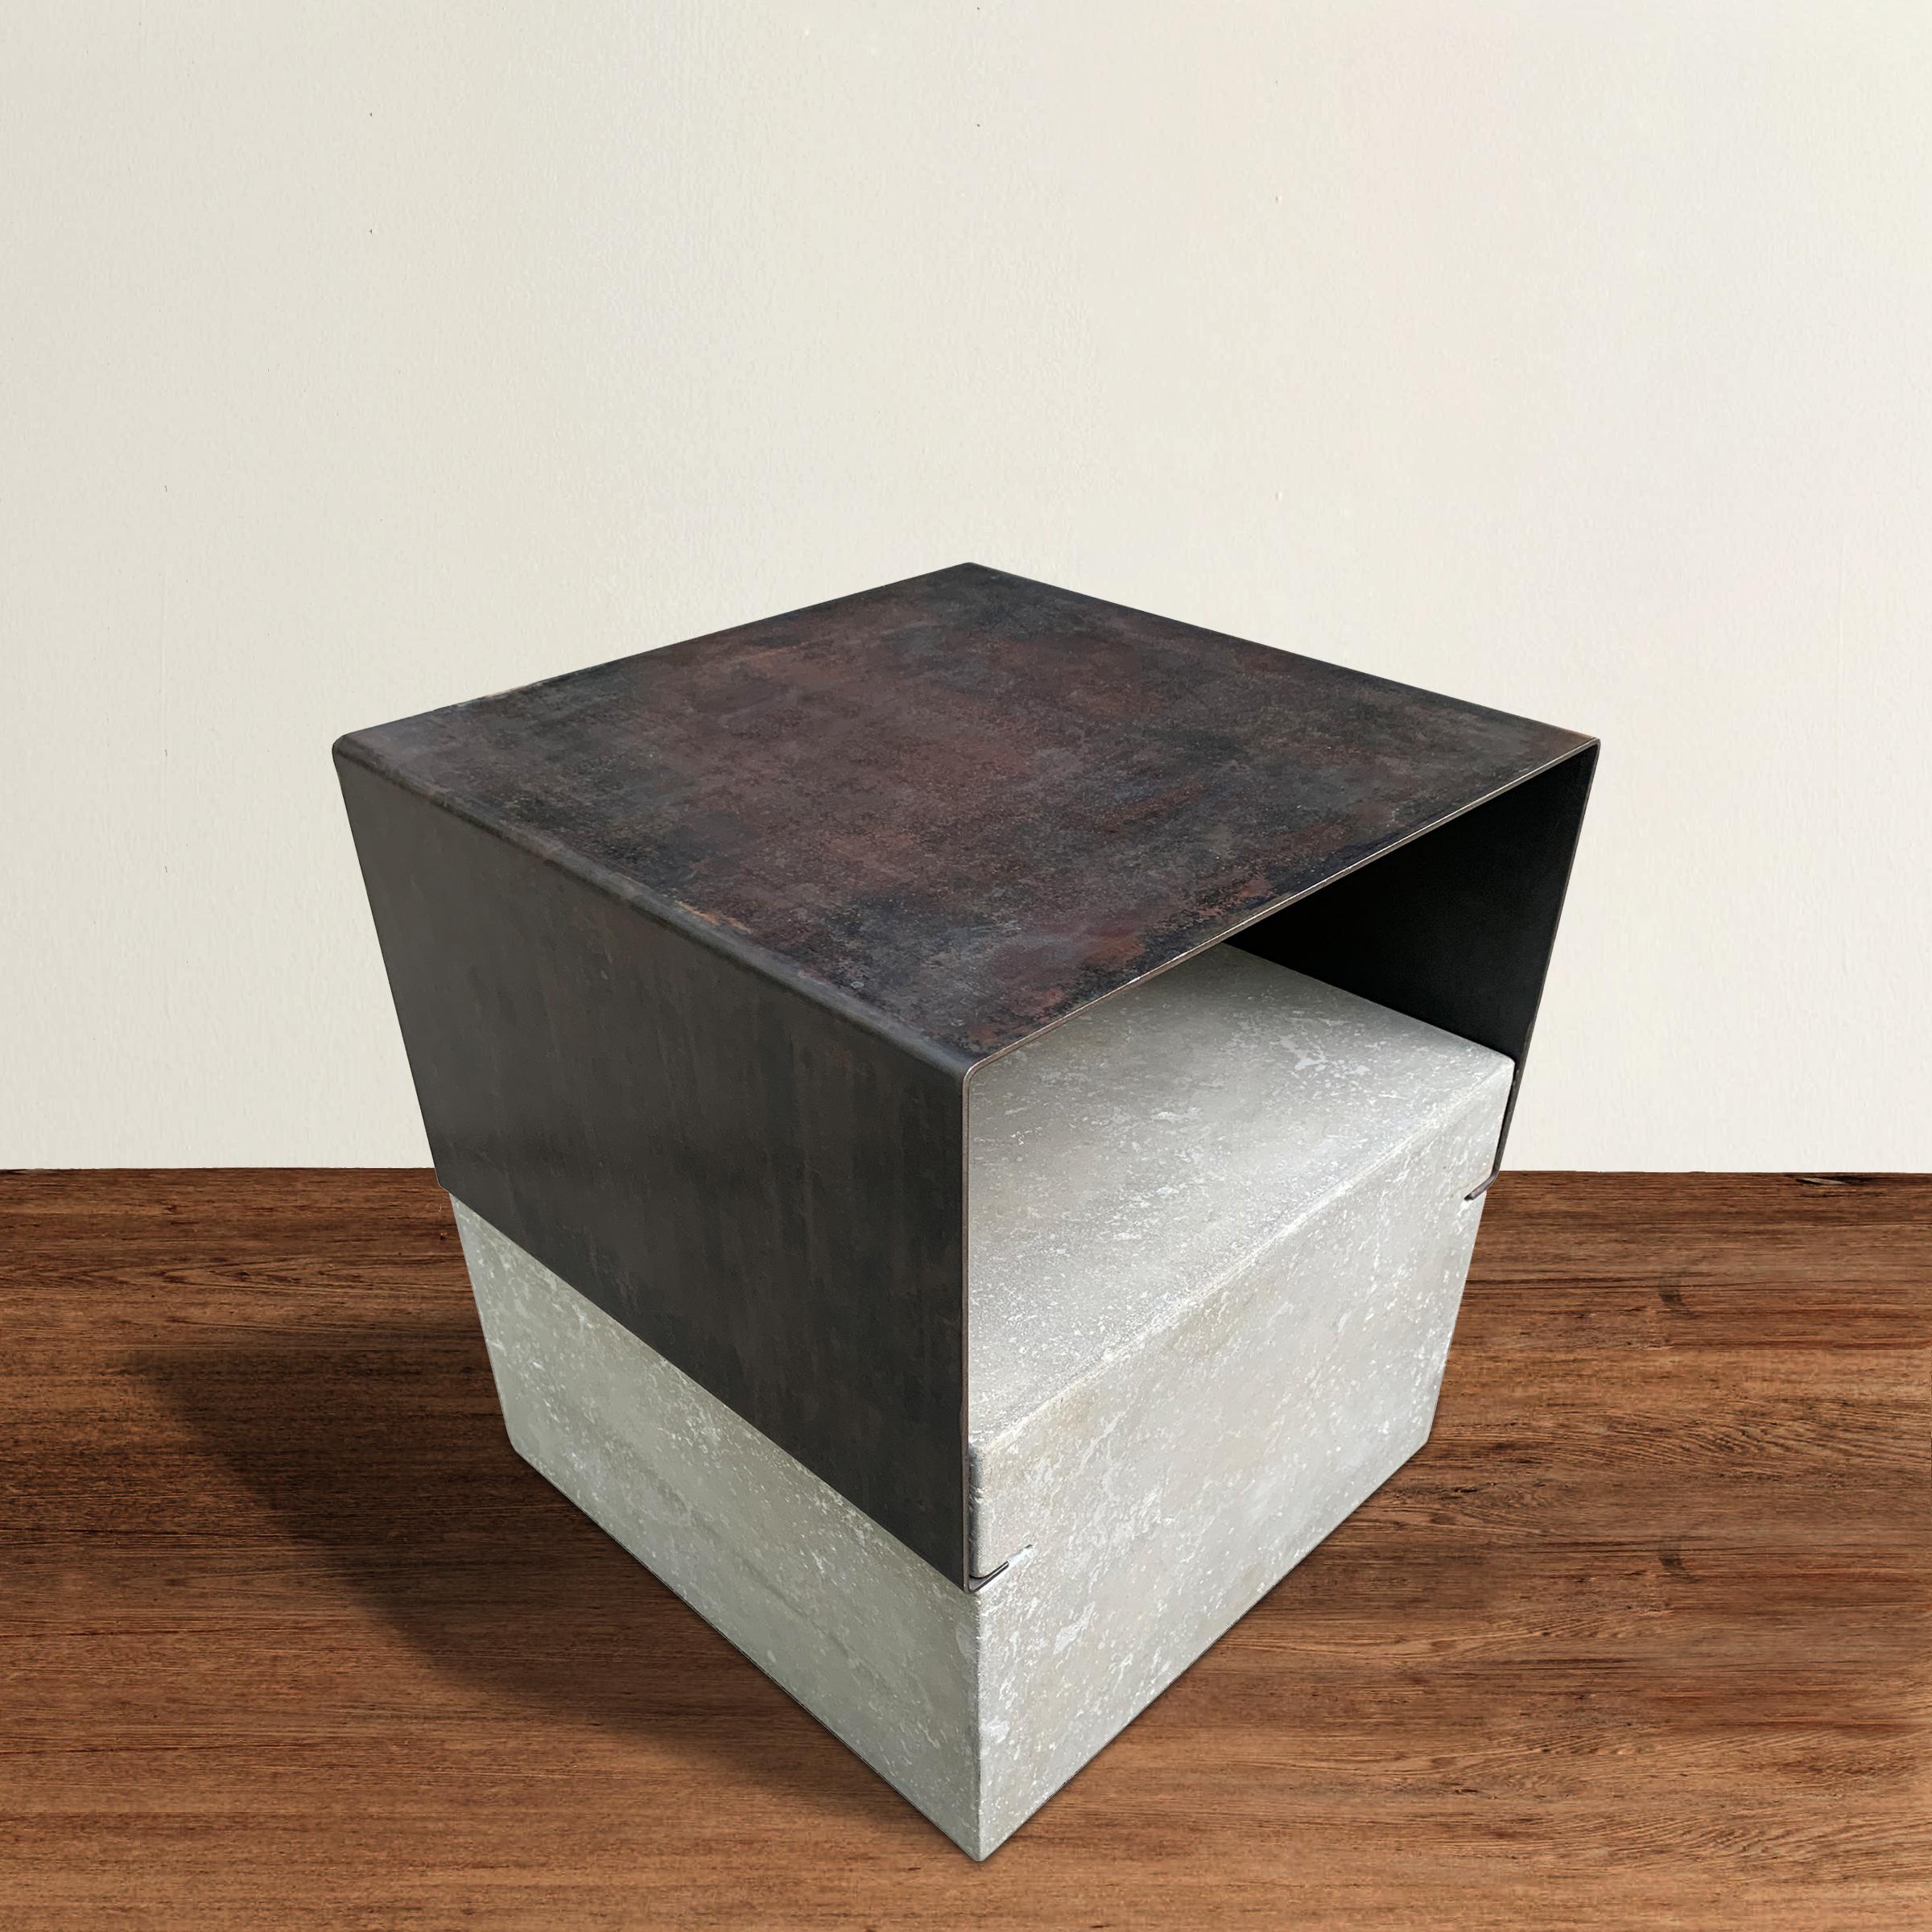 Modernists, rejoice! A chic modern-in-spirit side table constructed with a bent steel top that fits into a grooved cast concrete base.